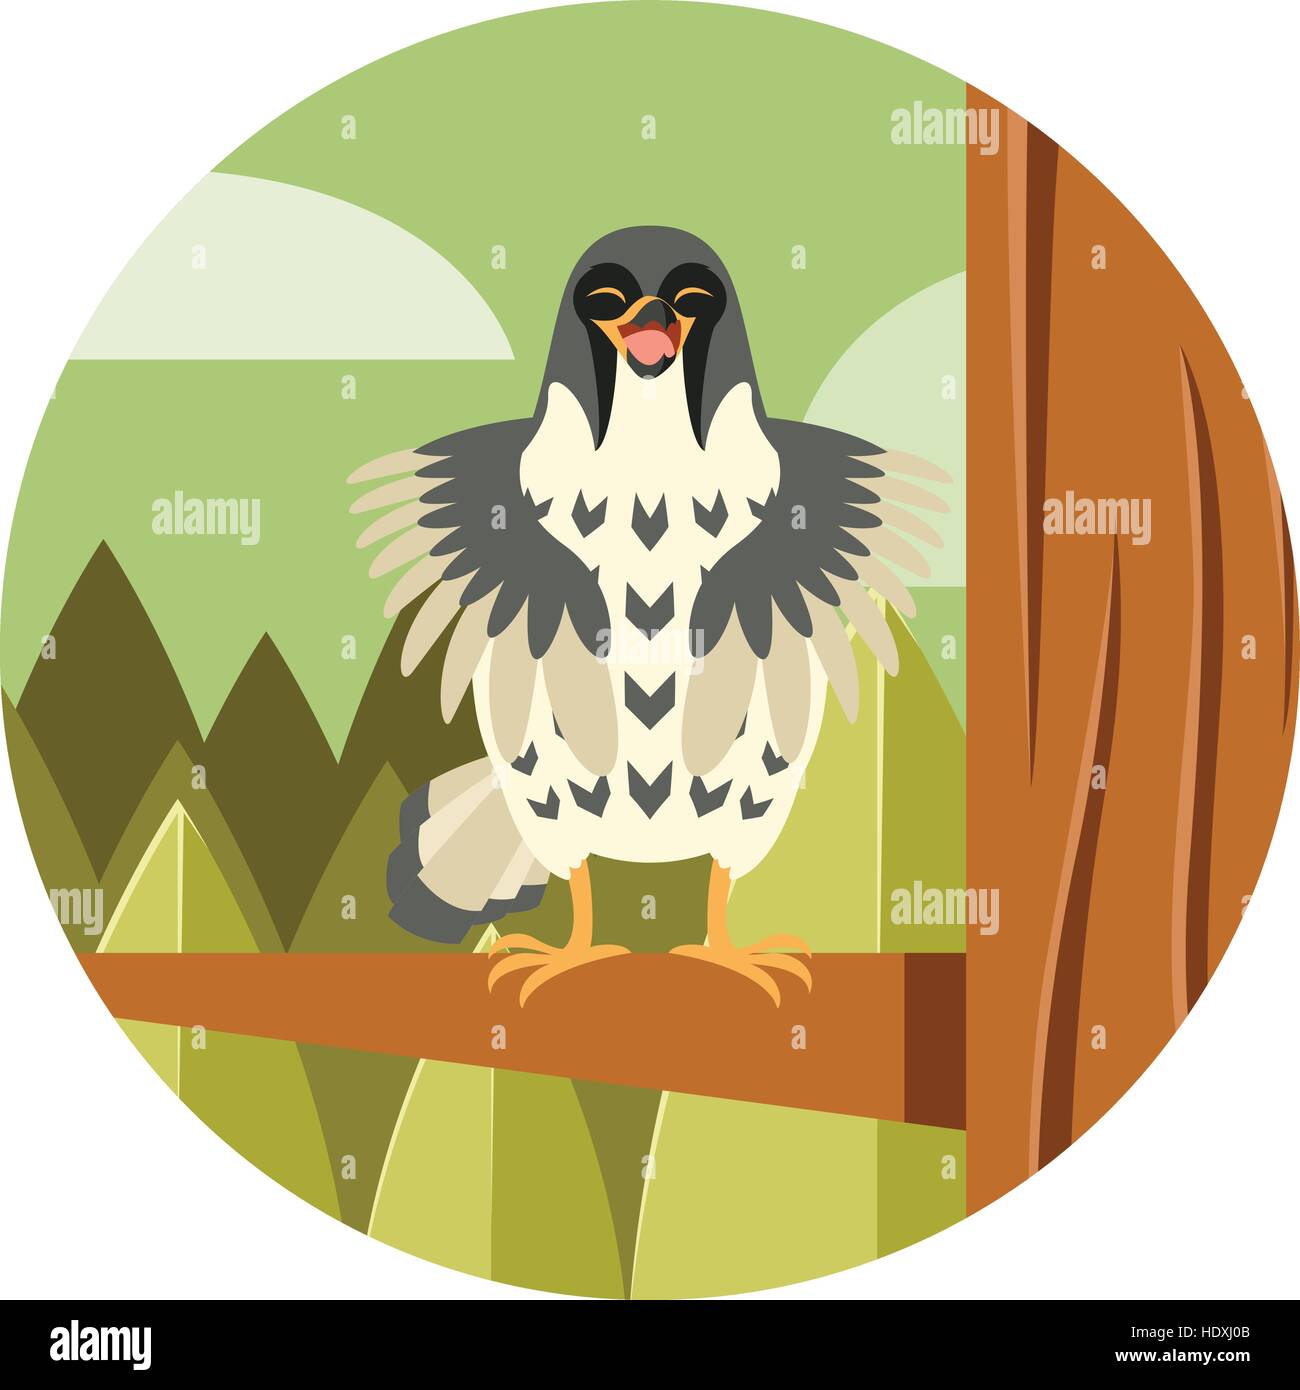 Vector image of the Happy Falcon on the Tree flat background Stock Vector